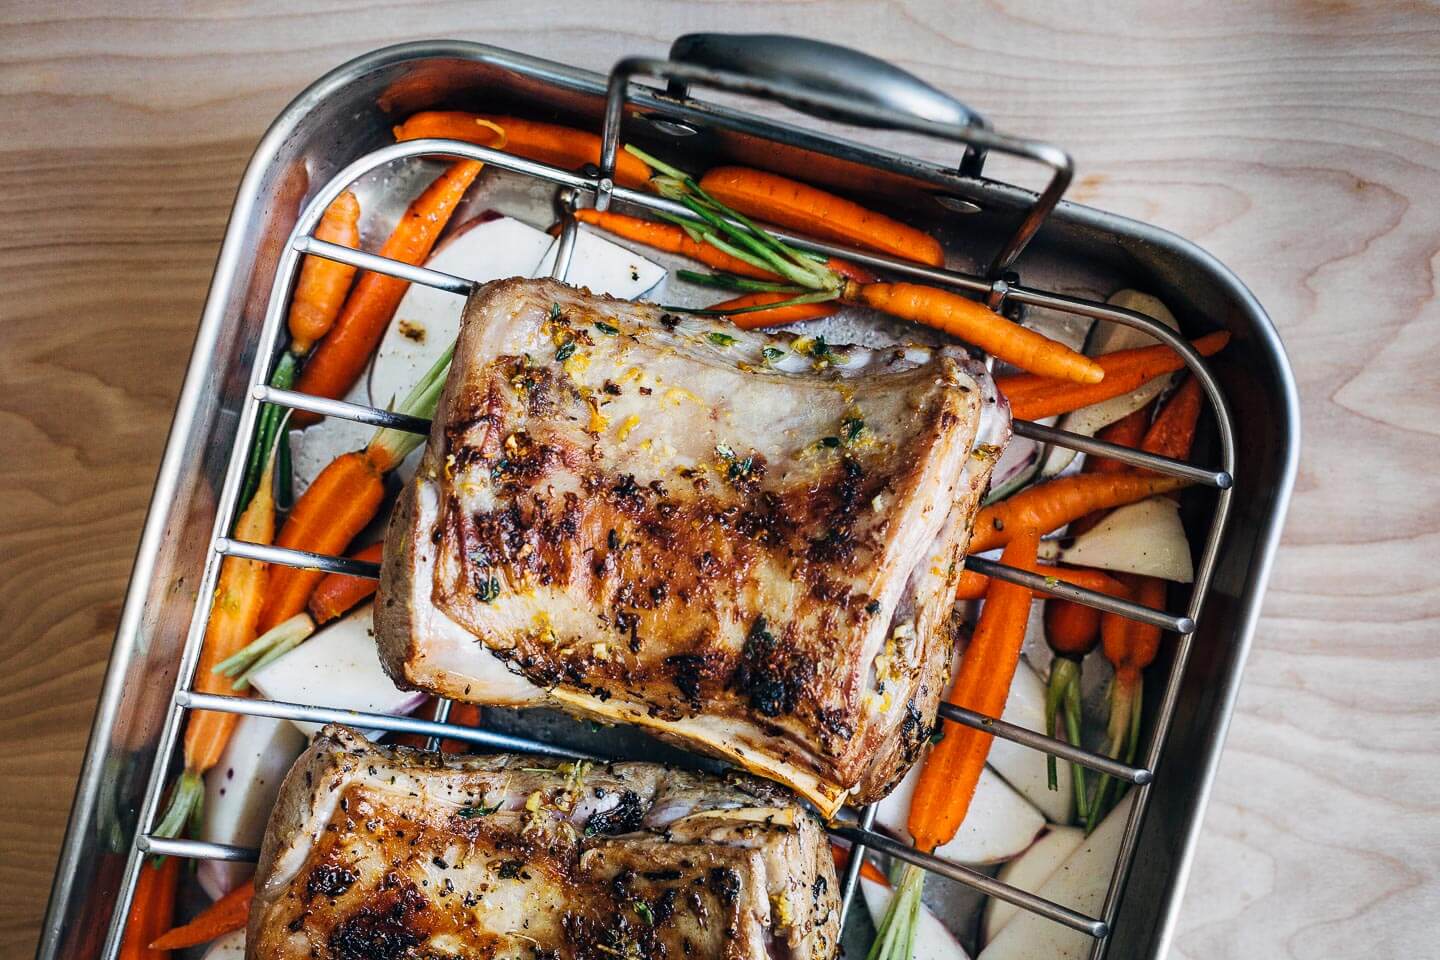 A dinner party-worthy recipe for rack of lamb roasted alongside root vegetables and served with a vibrant honey orange sauce.